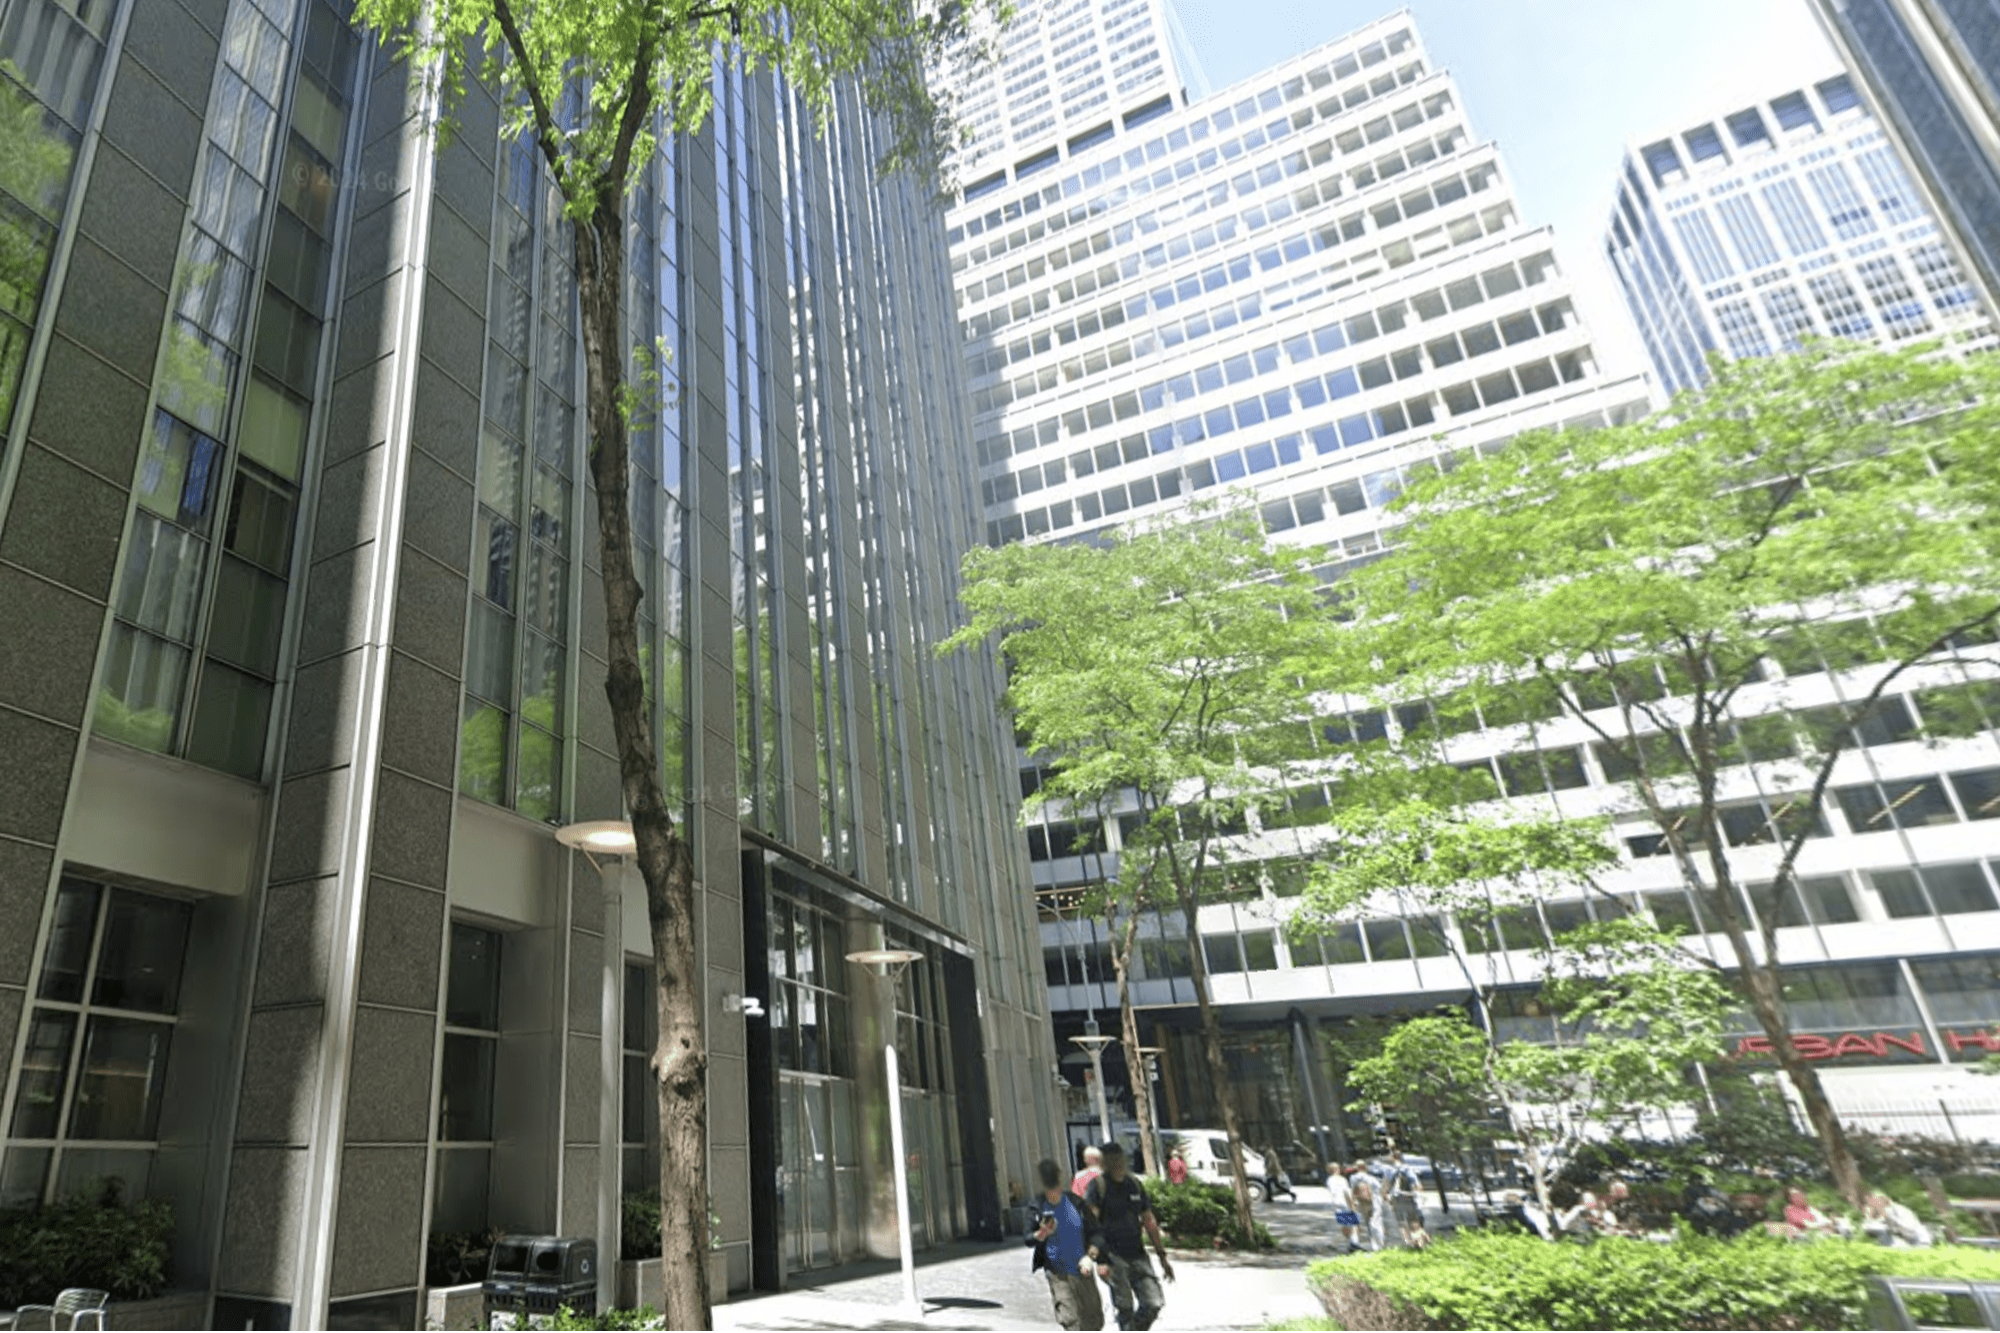 NYC Office Building Sells for 97.5% Less Than Original Price